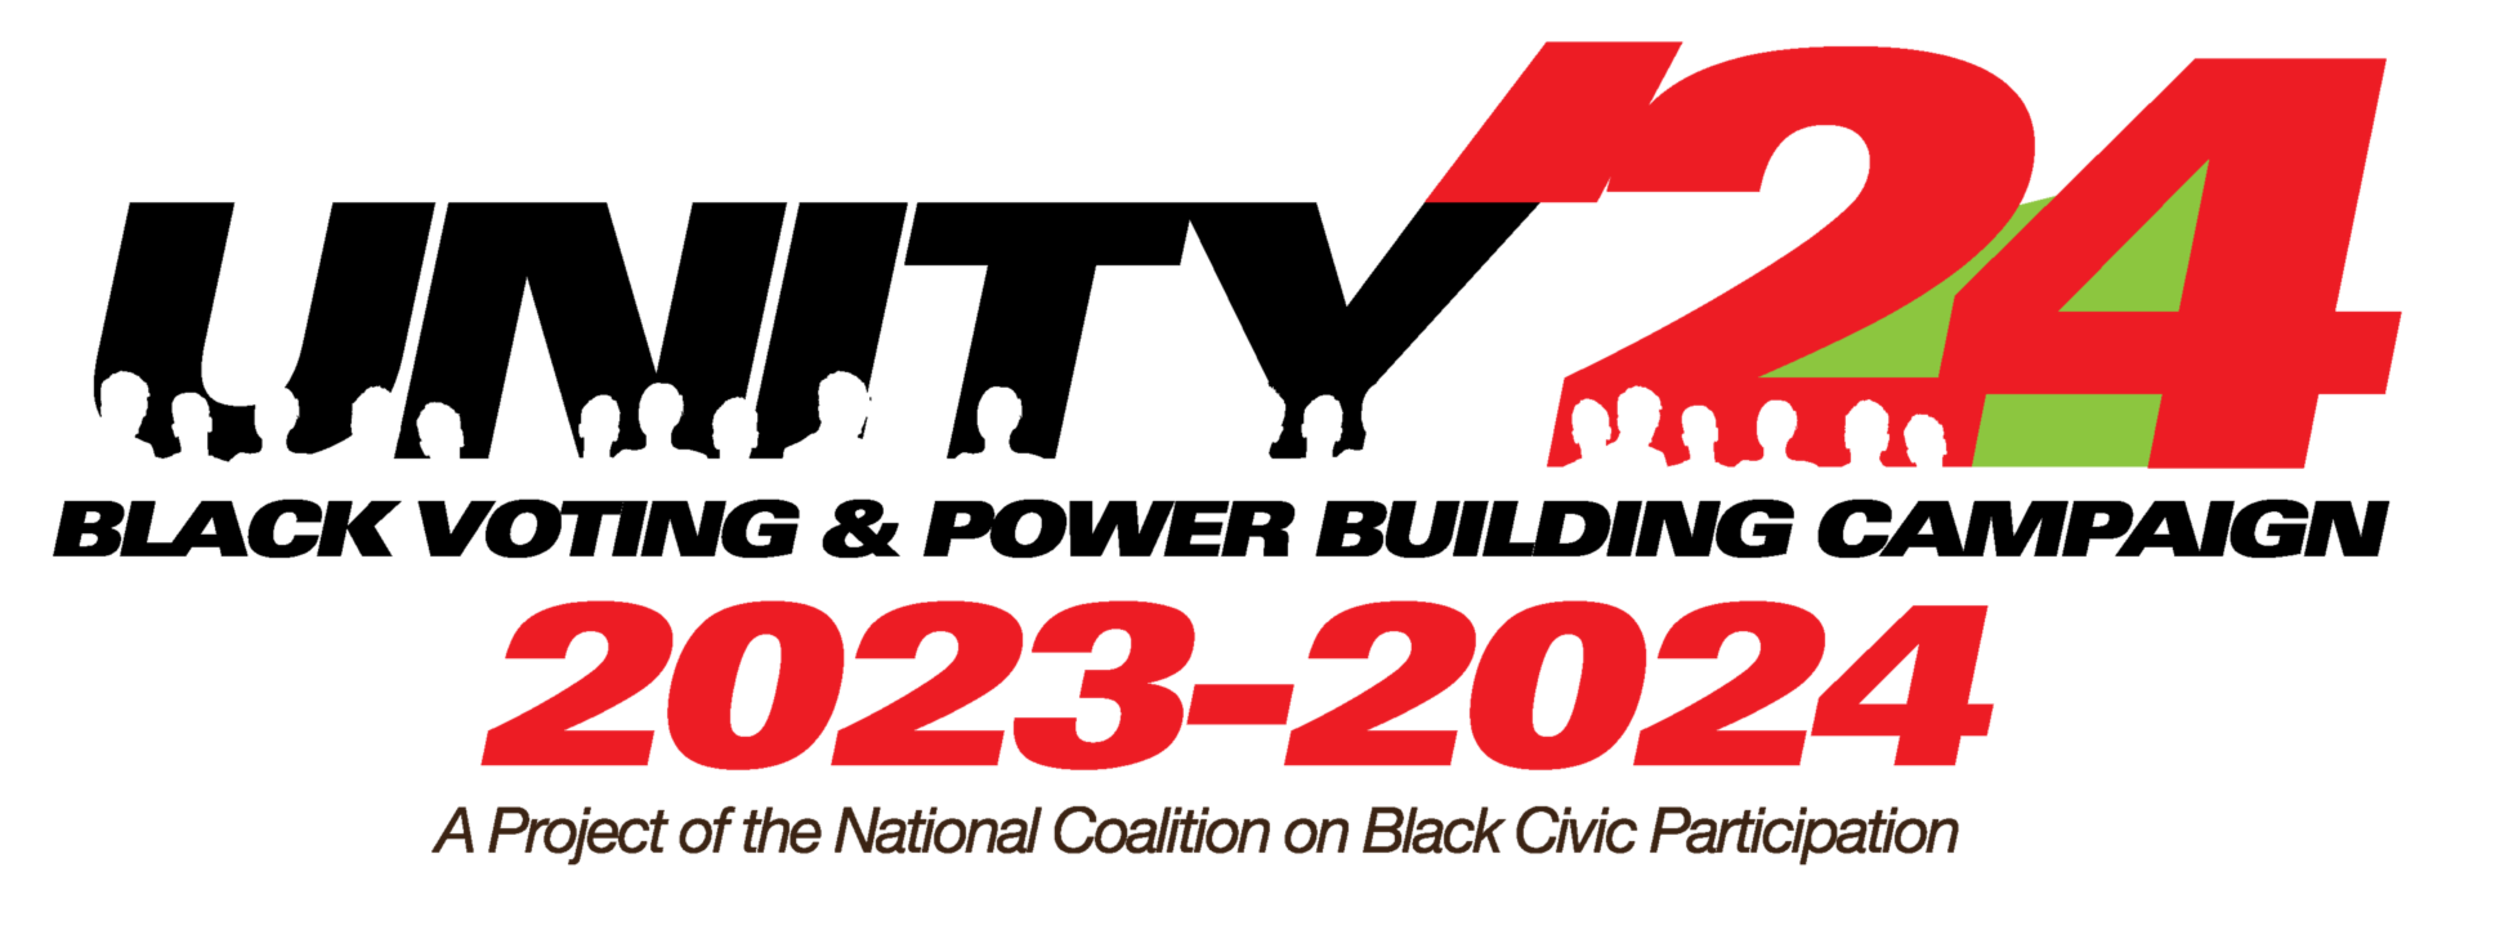 Unity '24 - Black Voting & Power Building Campaign - A Project of the National Coalition on Black Civic Participation